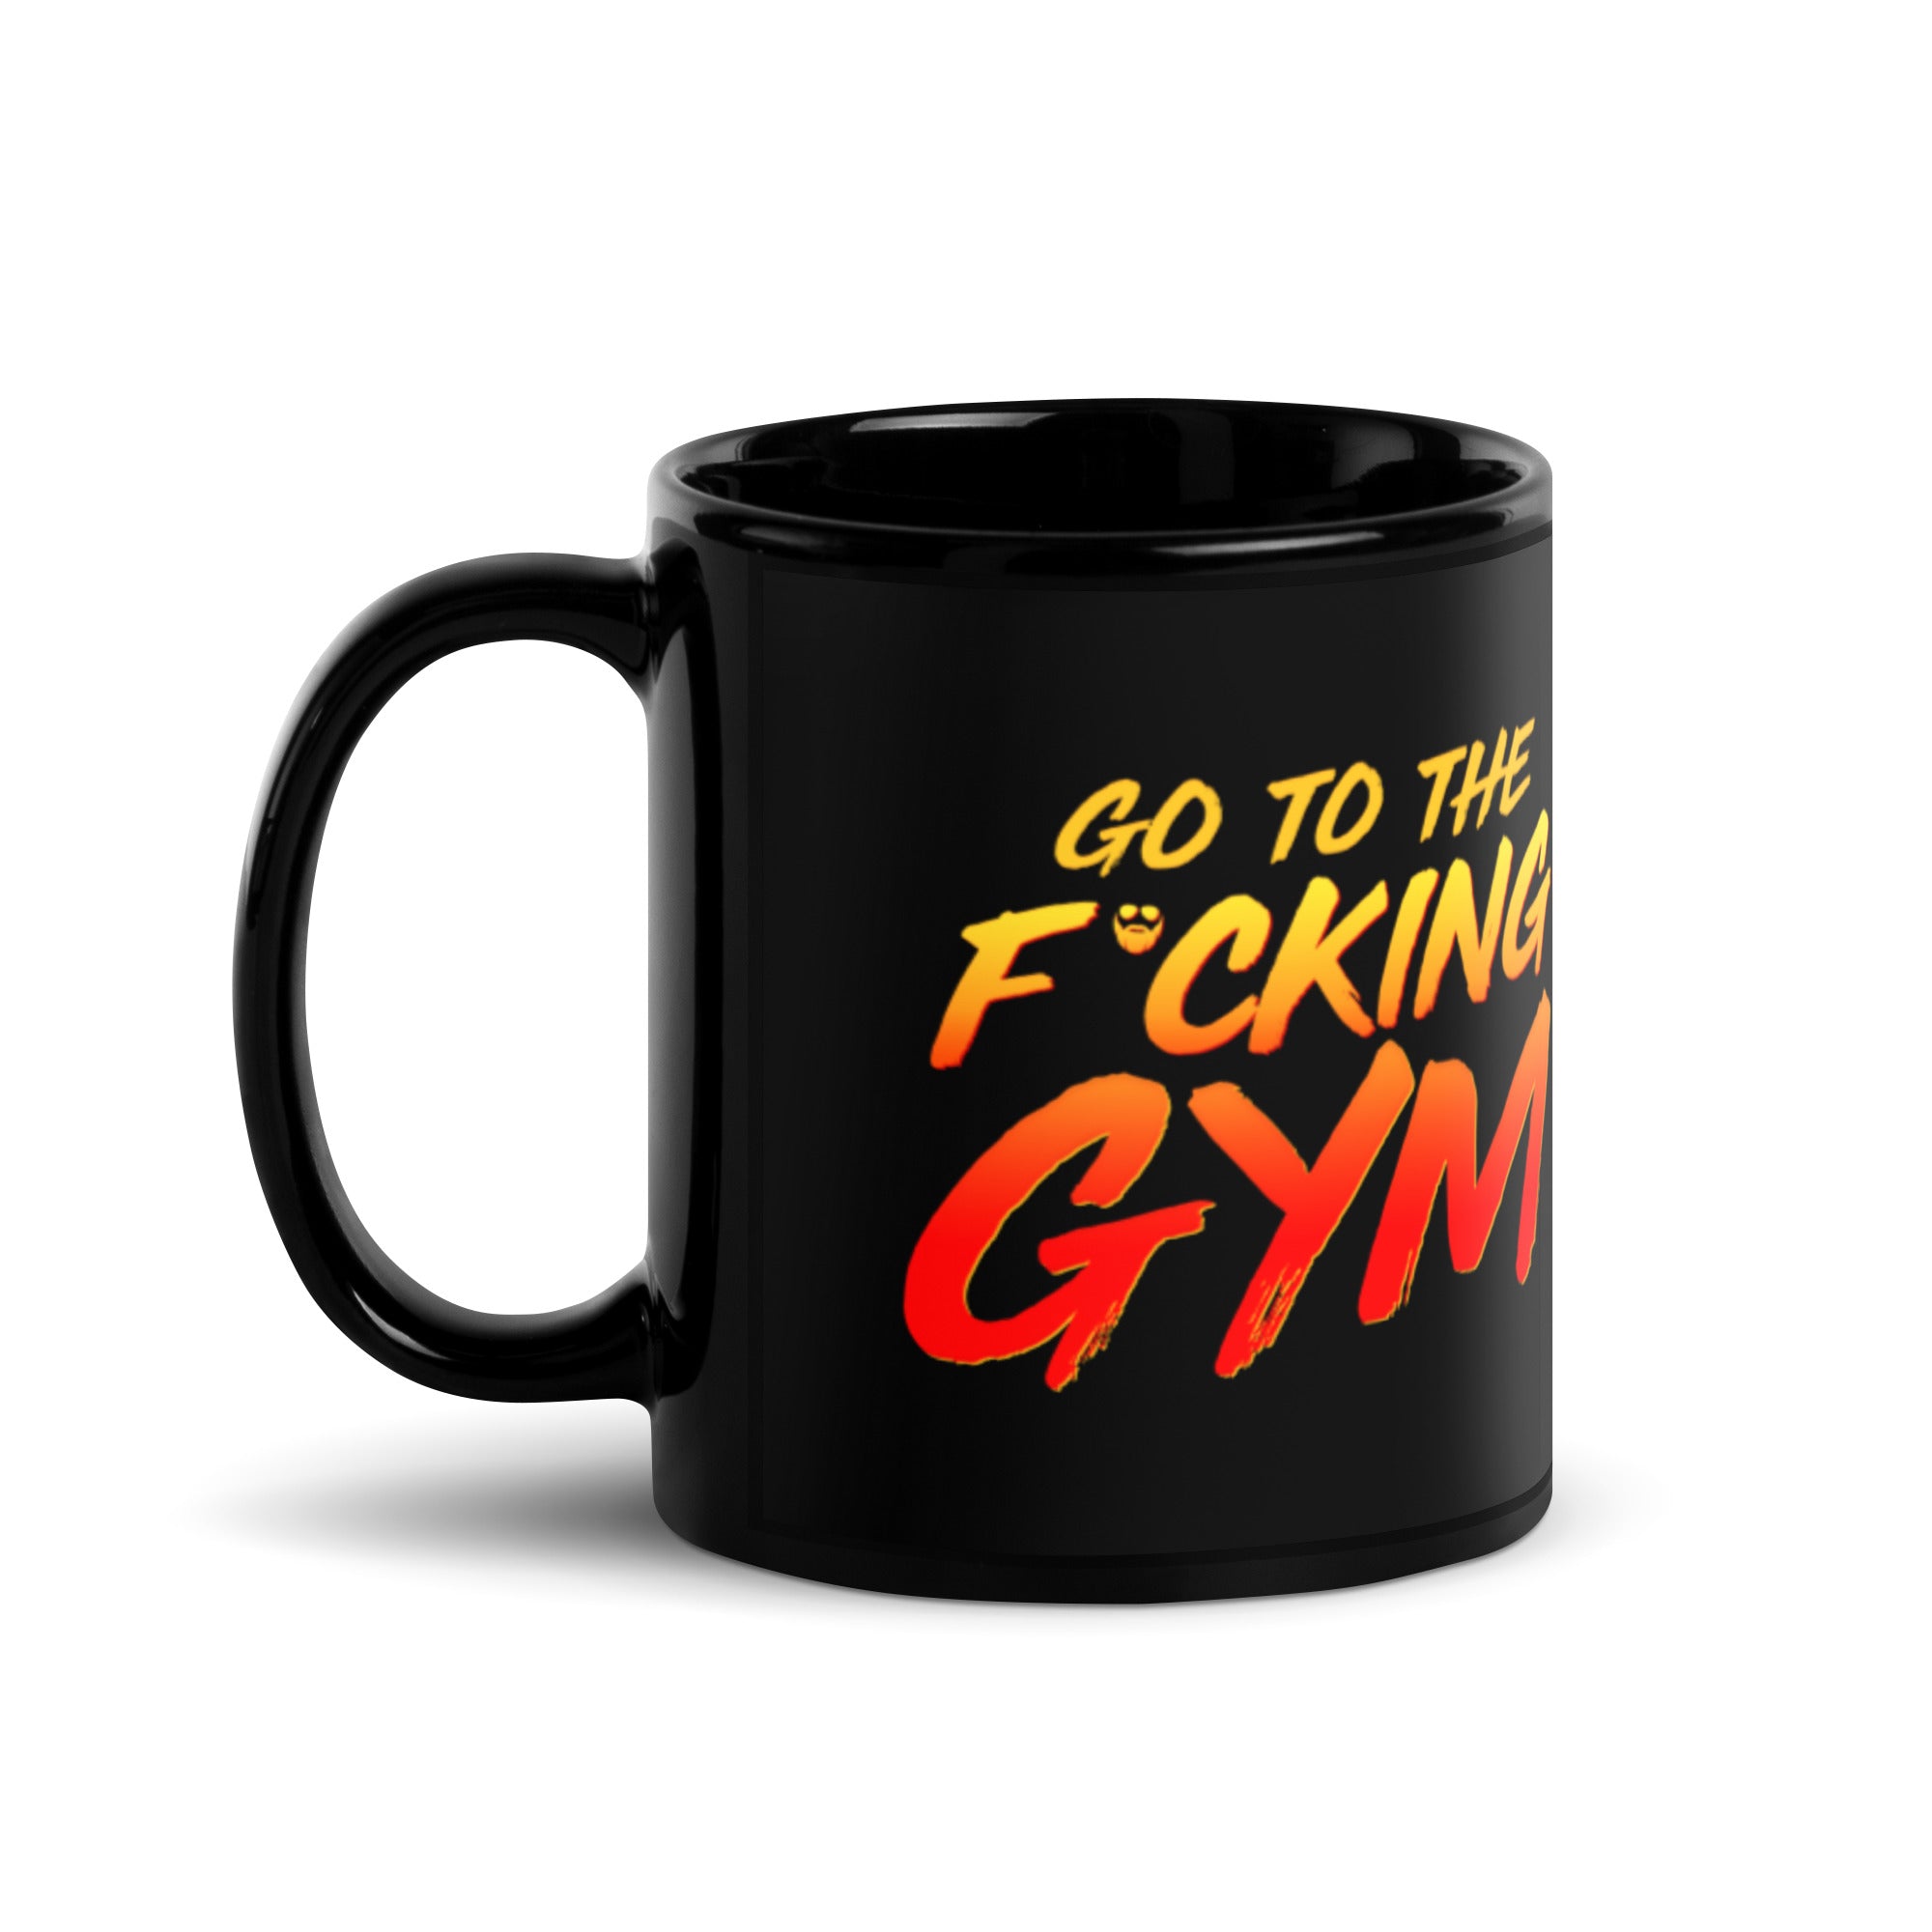 Installing Muscles Coffee Mug or Cup, Fitness or Gym Mug or Cup Gift –  Coffee Mugs Never Lie